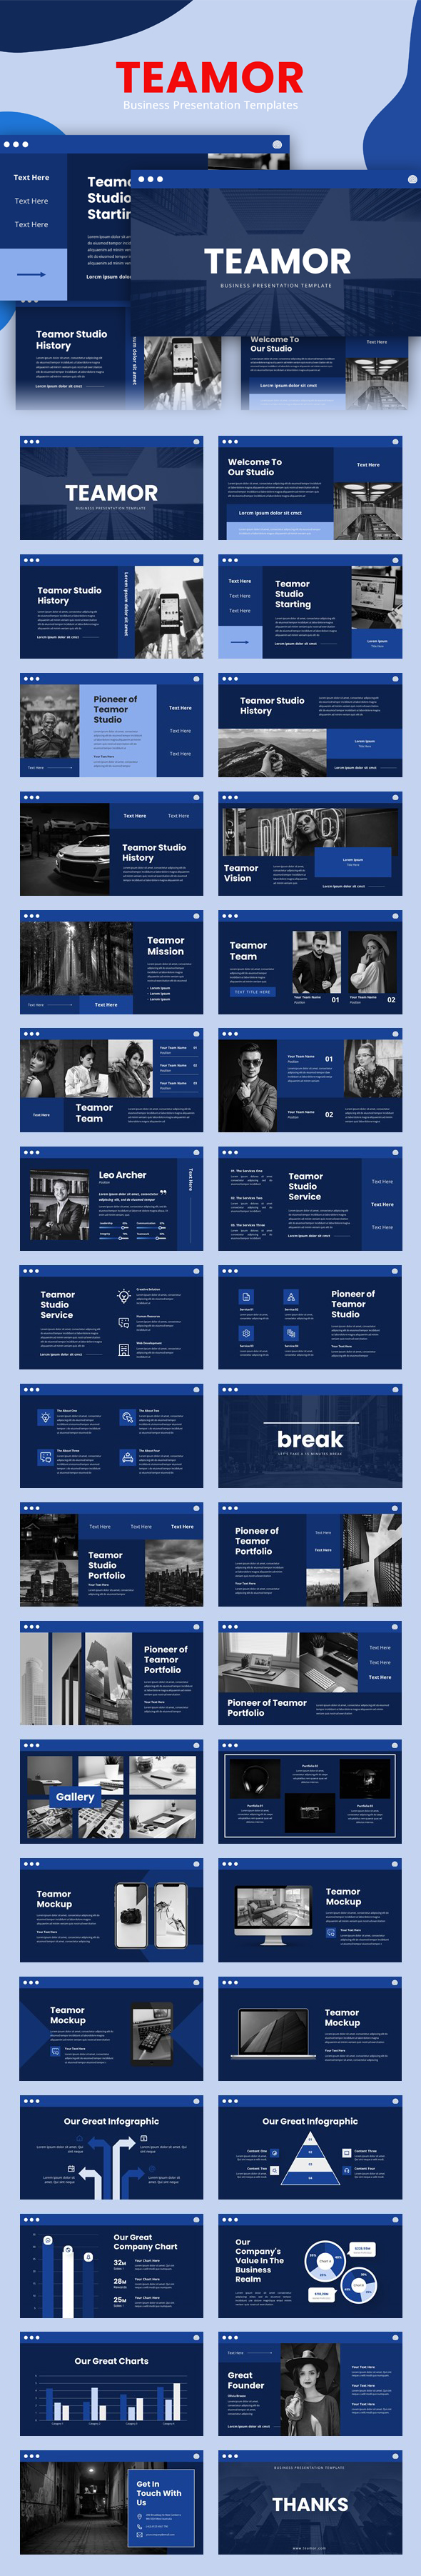 [DOWNLOAD]Teamor - Modern Business PowerPoint Template